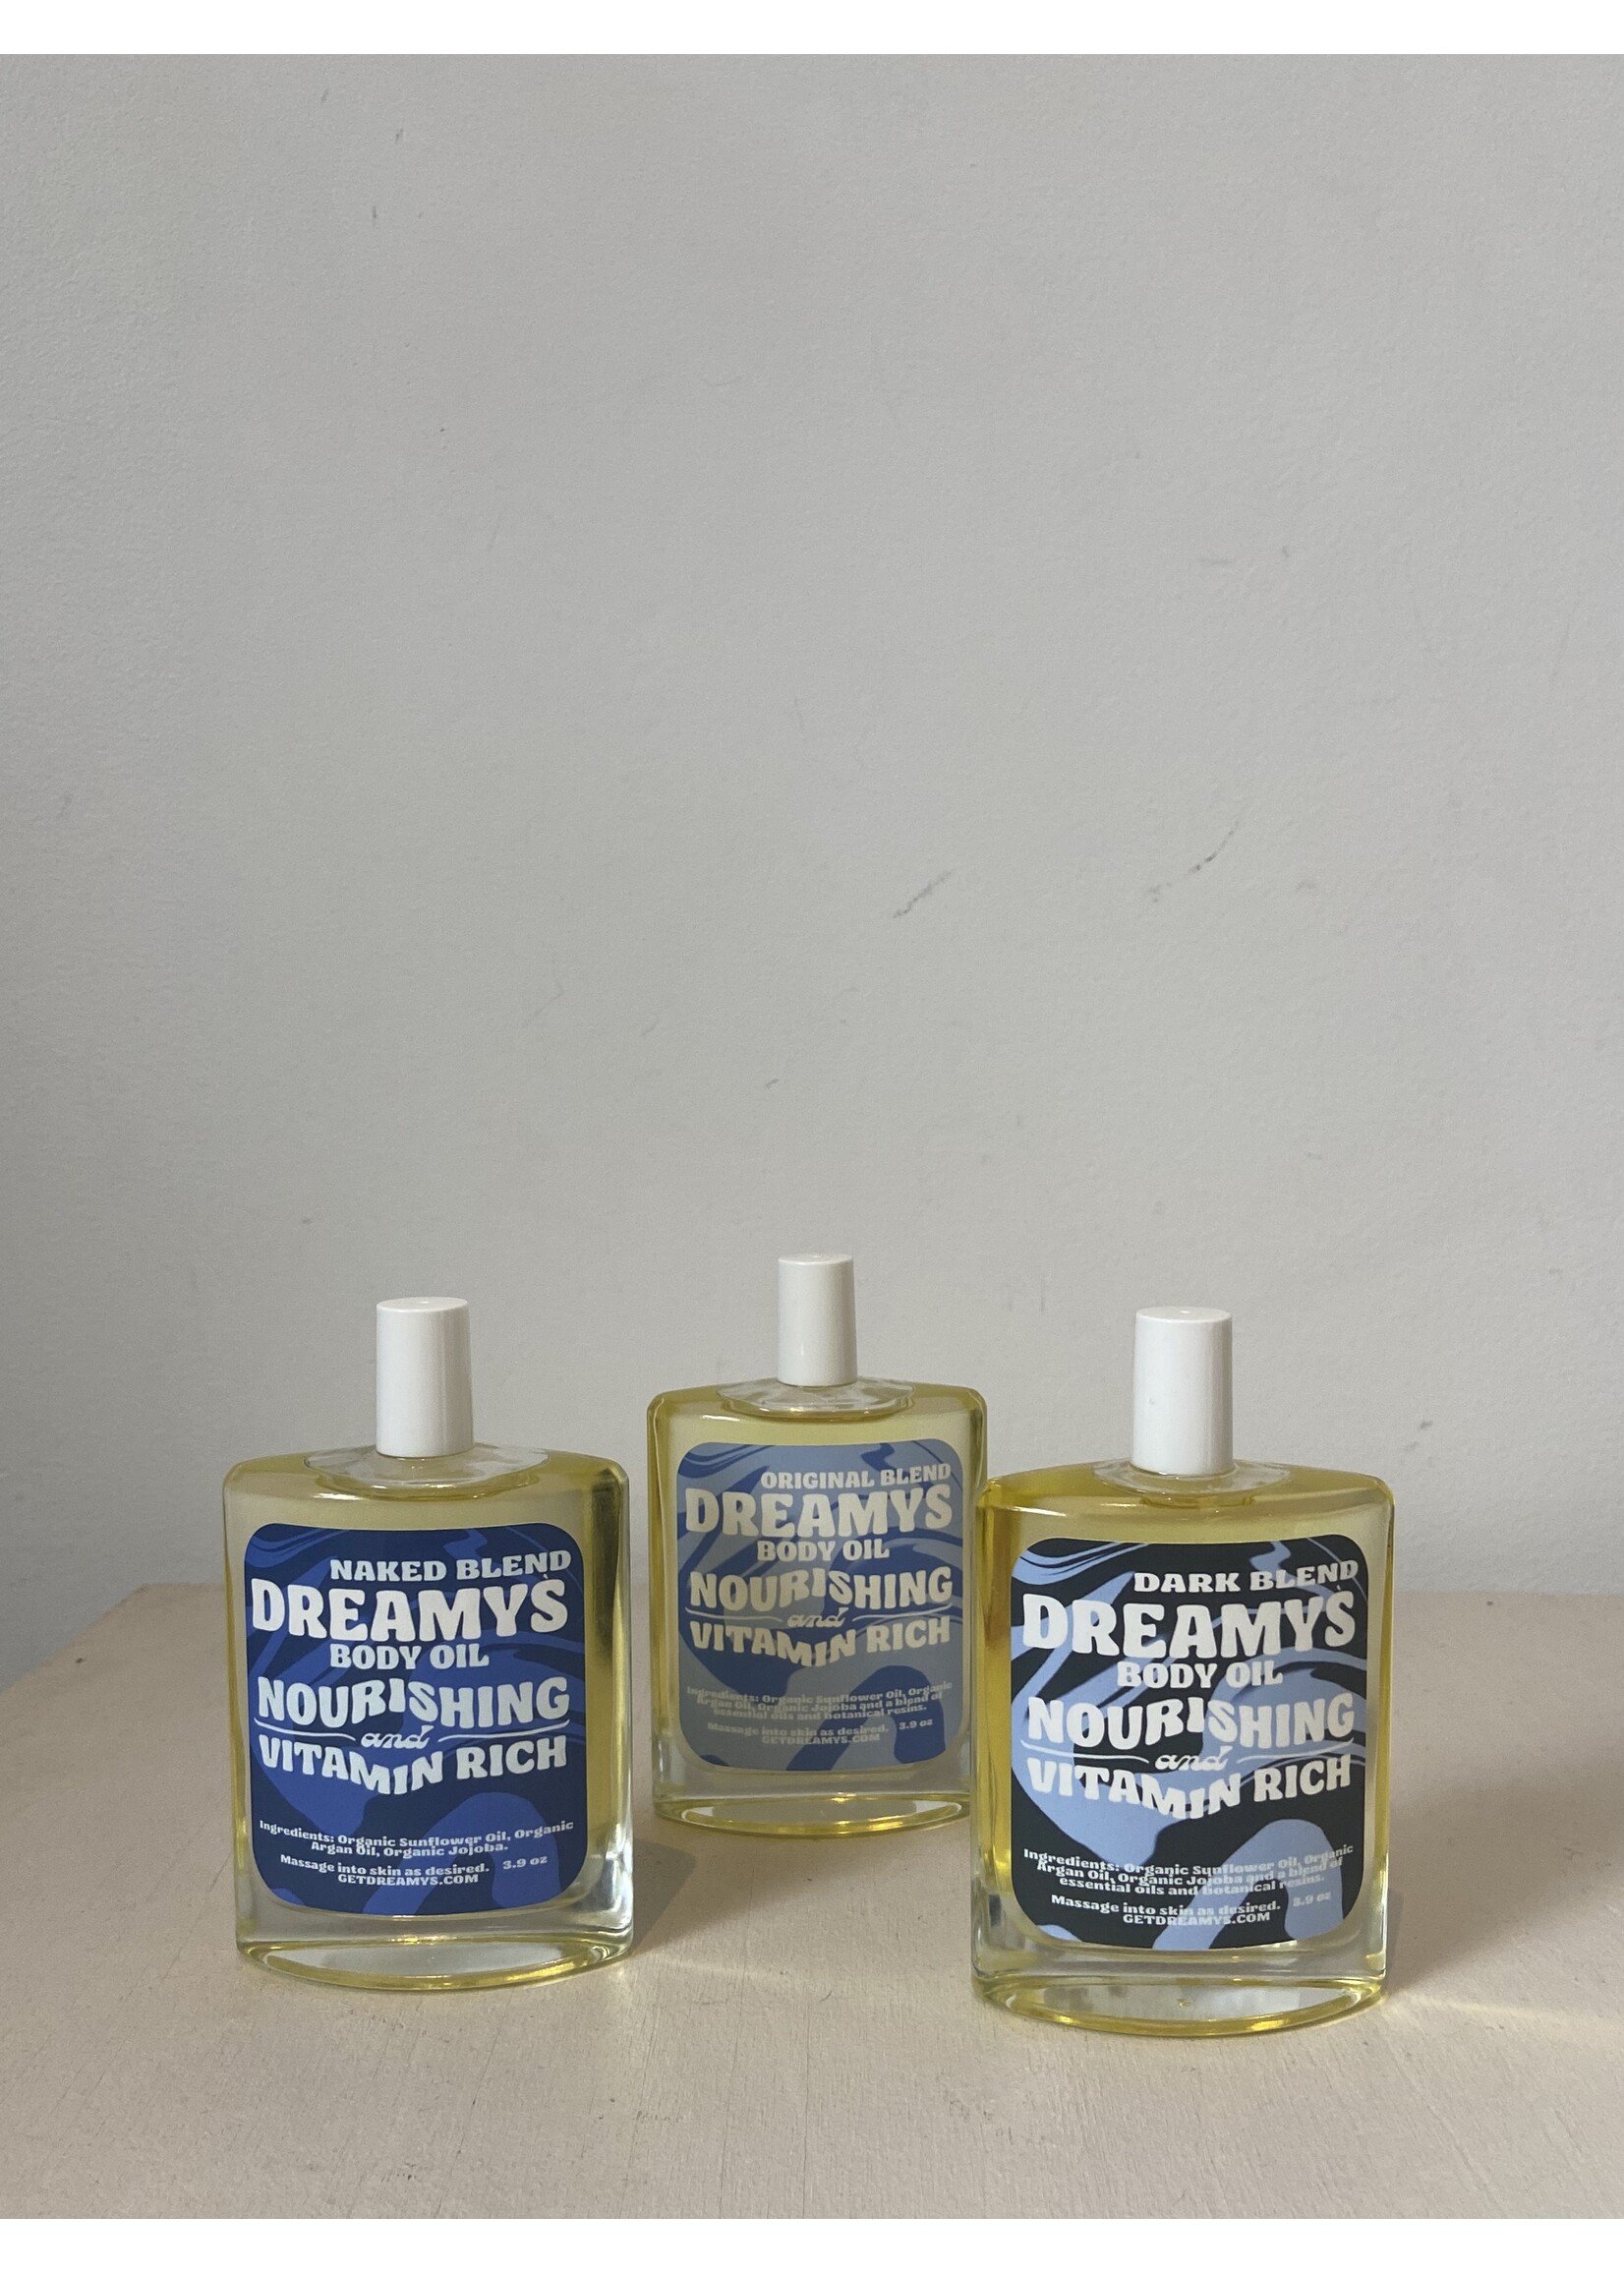 Wild Yonder Botanicals Huiles pour corps "Dreamys" par Wild Yonder Botanicals